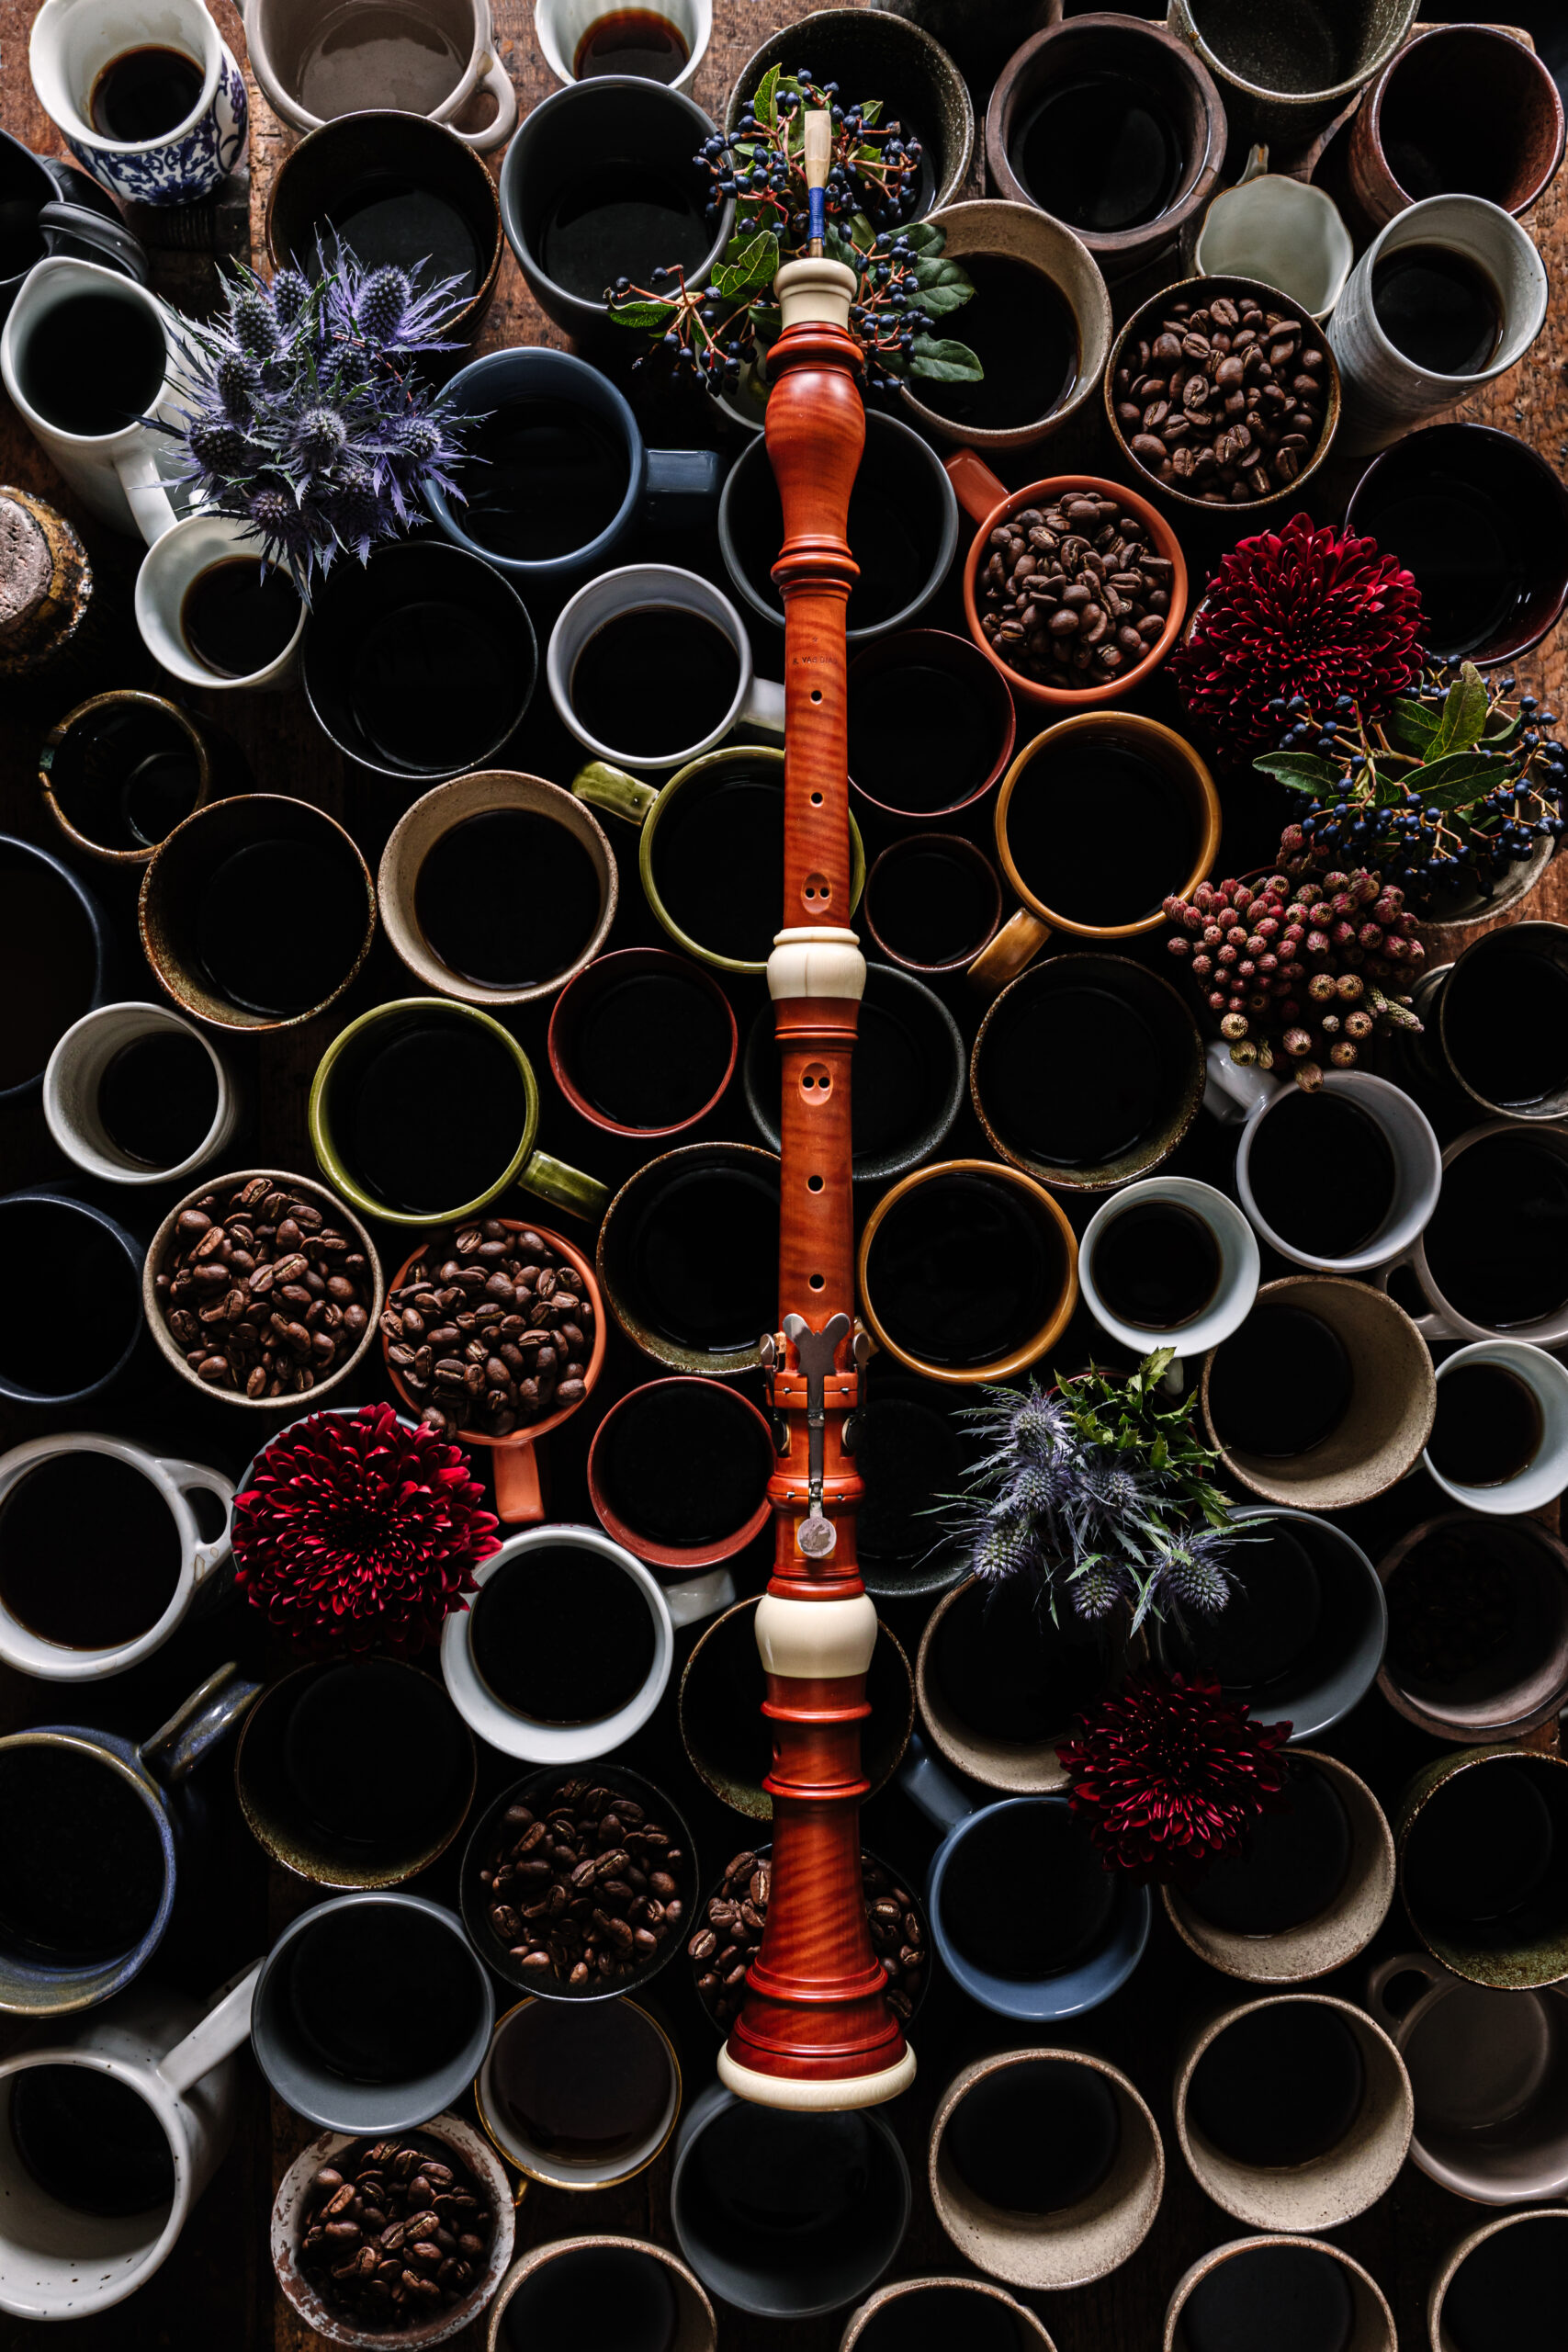 An image of random colourful mugs with a few of them filled with coffee beans and a bassoon placed on them vertically